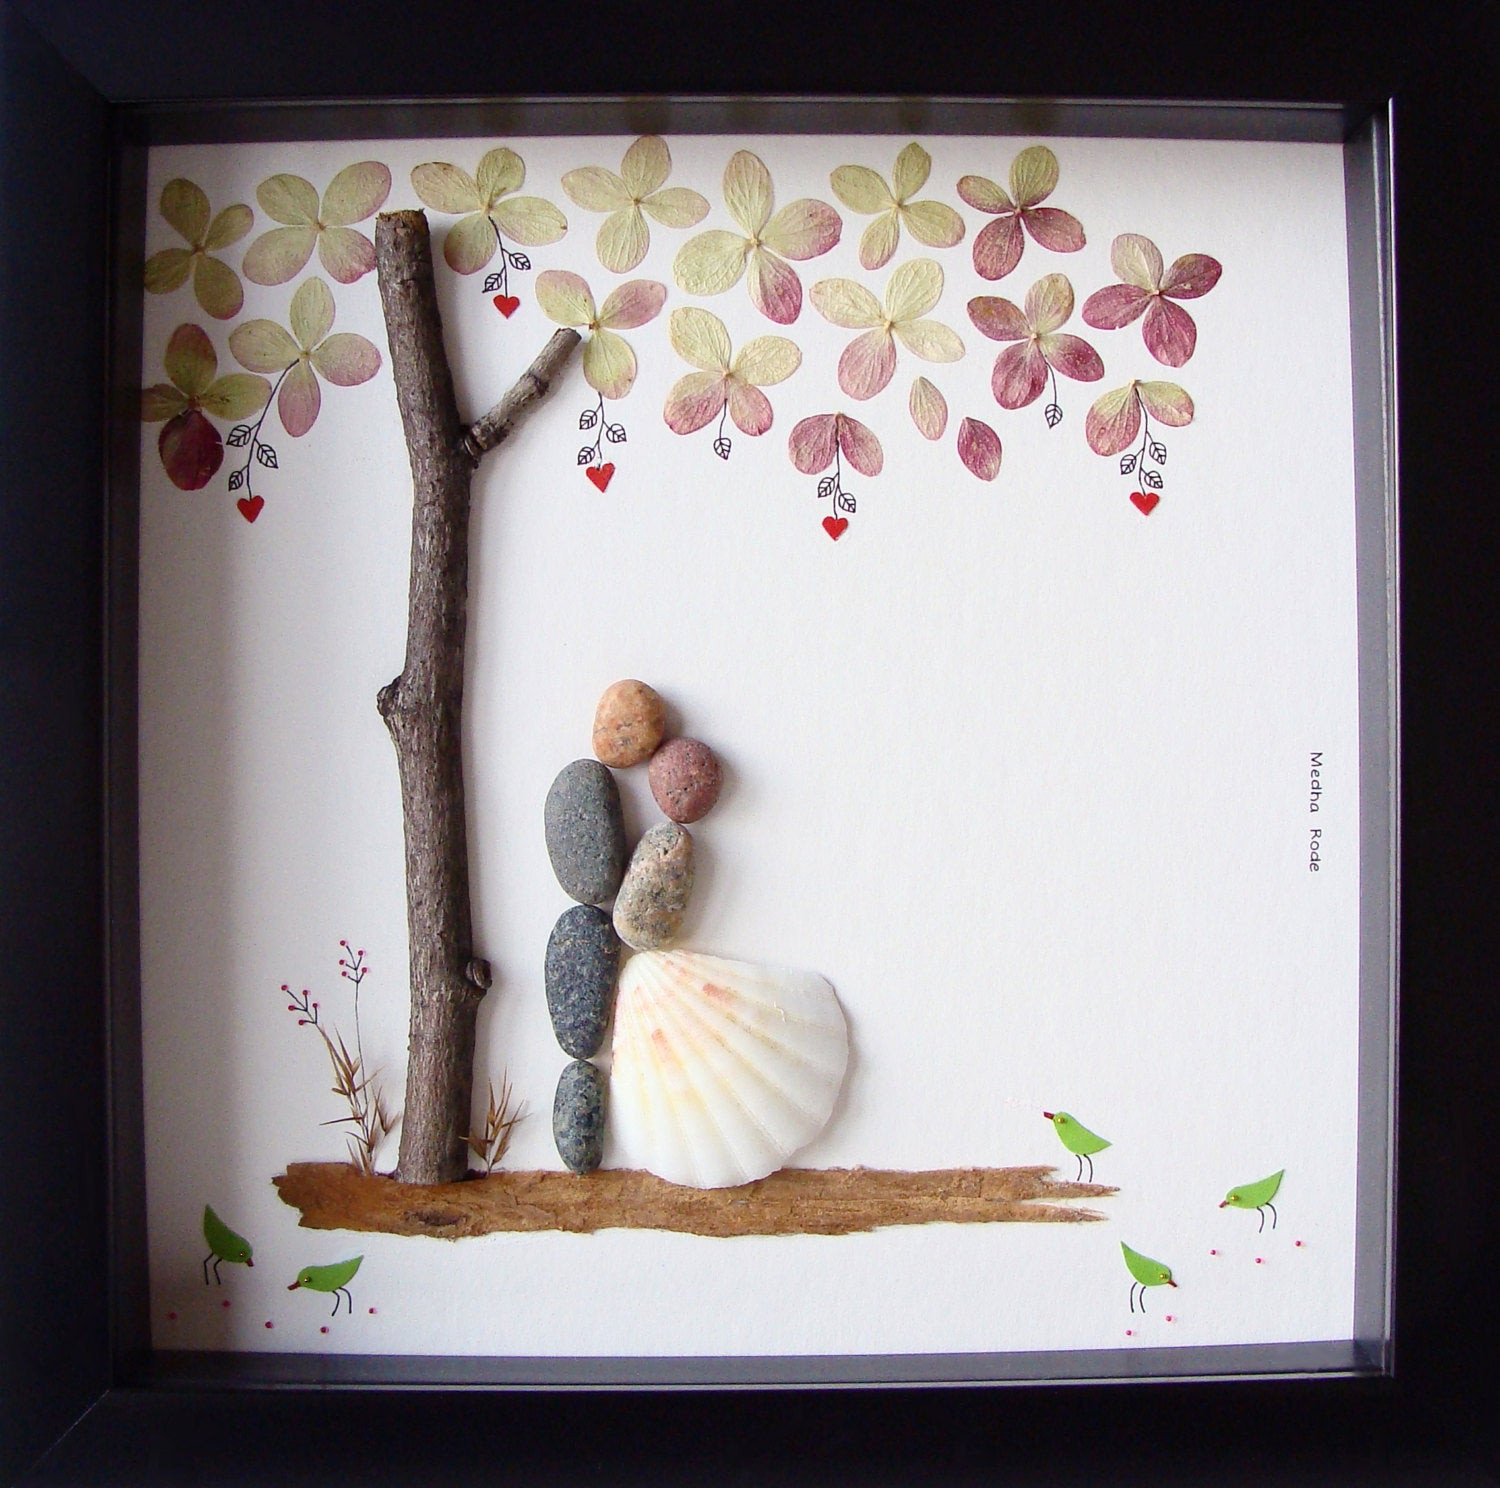 Gift Ideas For Wedding Couple
 Unique Wedding Gift For Couple Wedding Pebble Art by MedhaRode